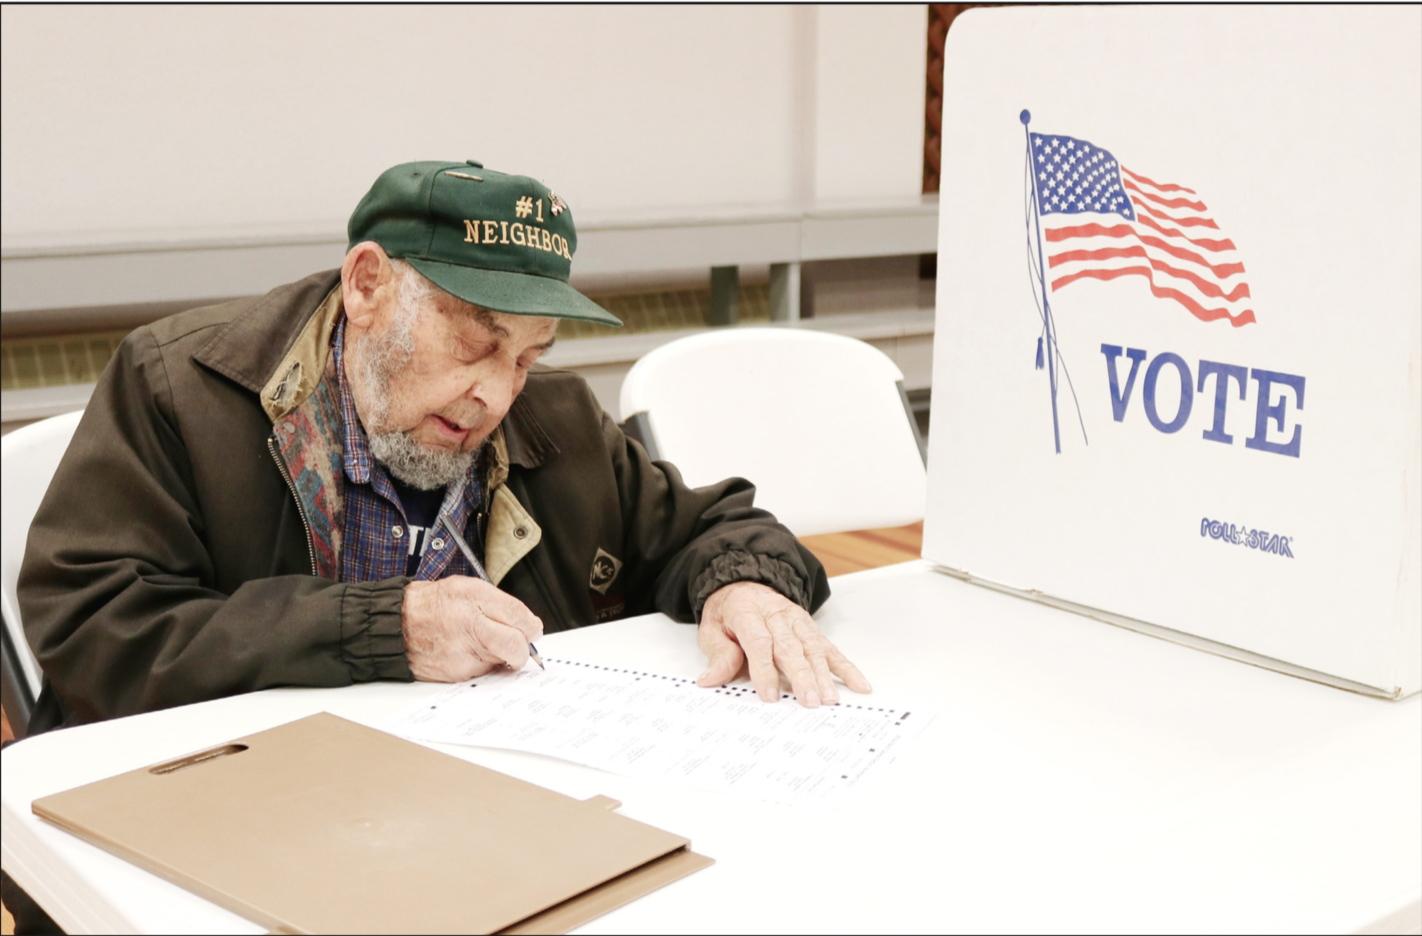 Carrol Lipp showed up bright and early Tuesday morning to fill out his ballot for the 2018 General Election.